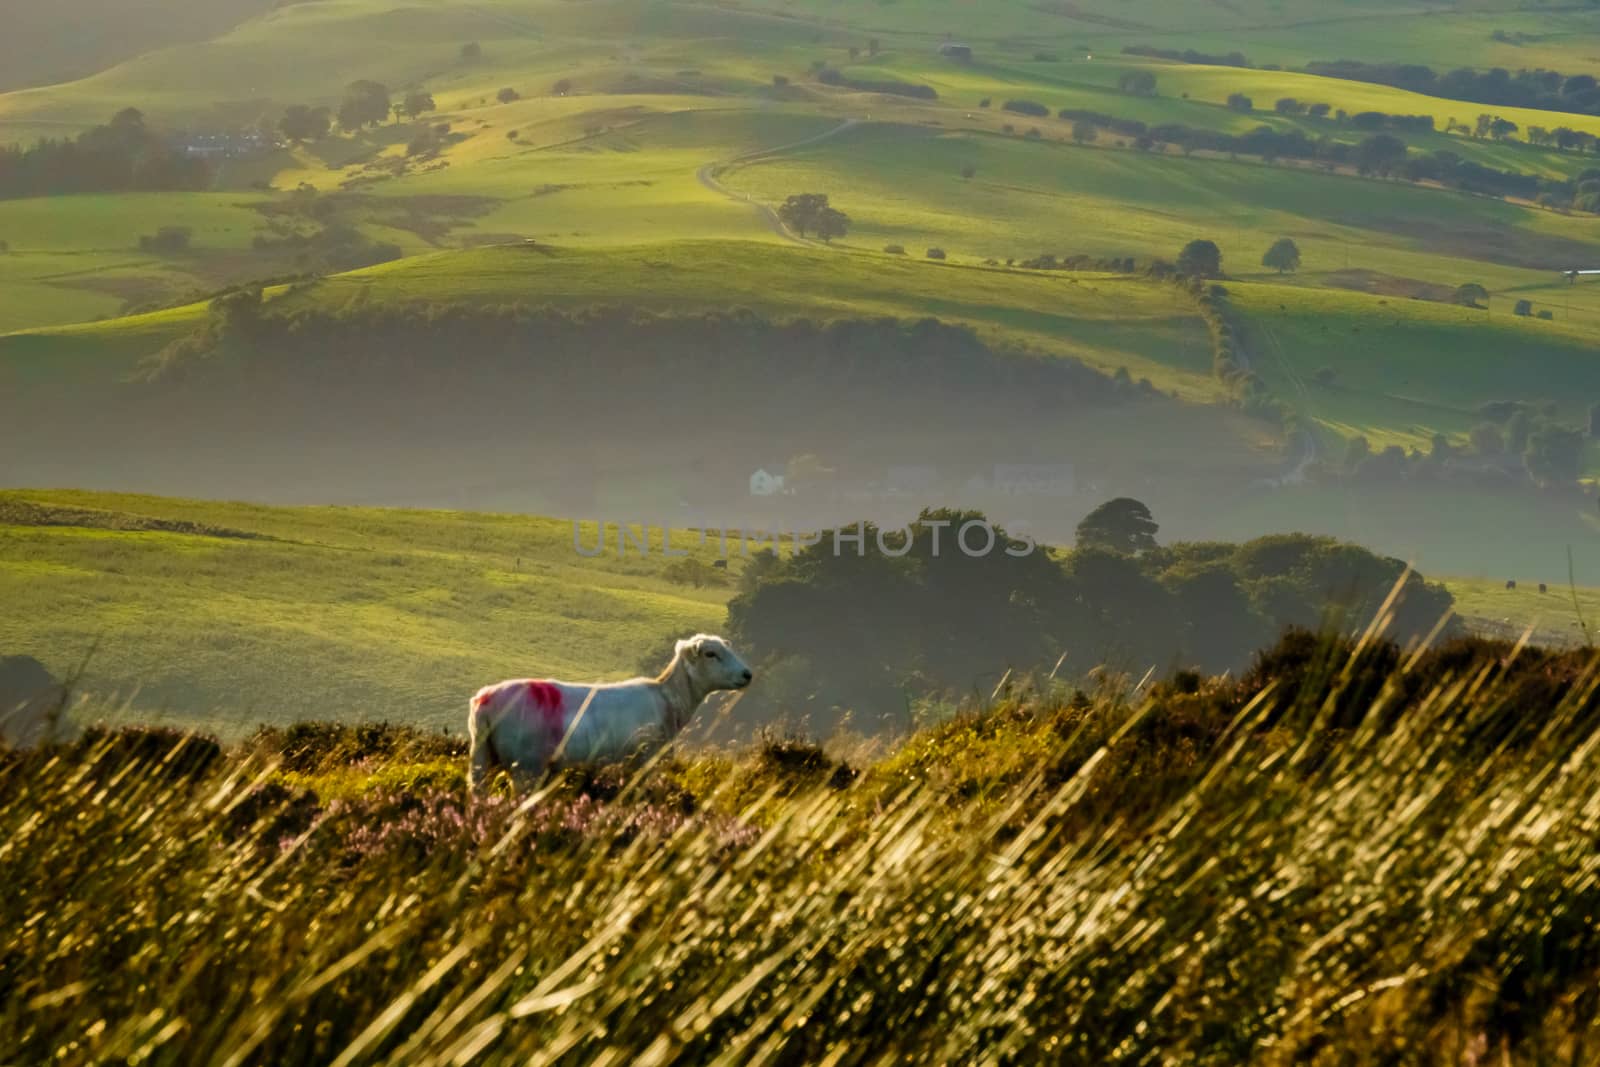 Landscape of white sheep in the long grass of a field durng golden hour. Rolling hills of English farmland in the background.